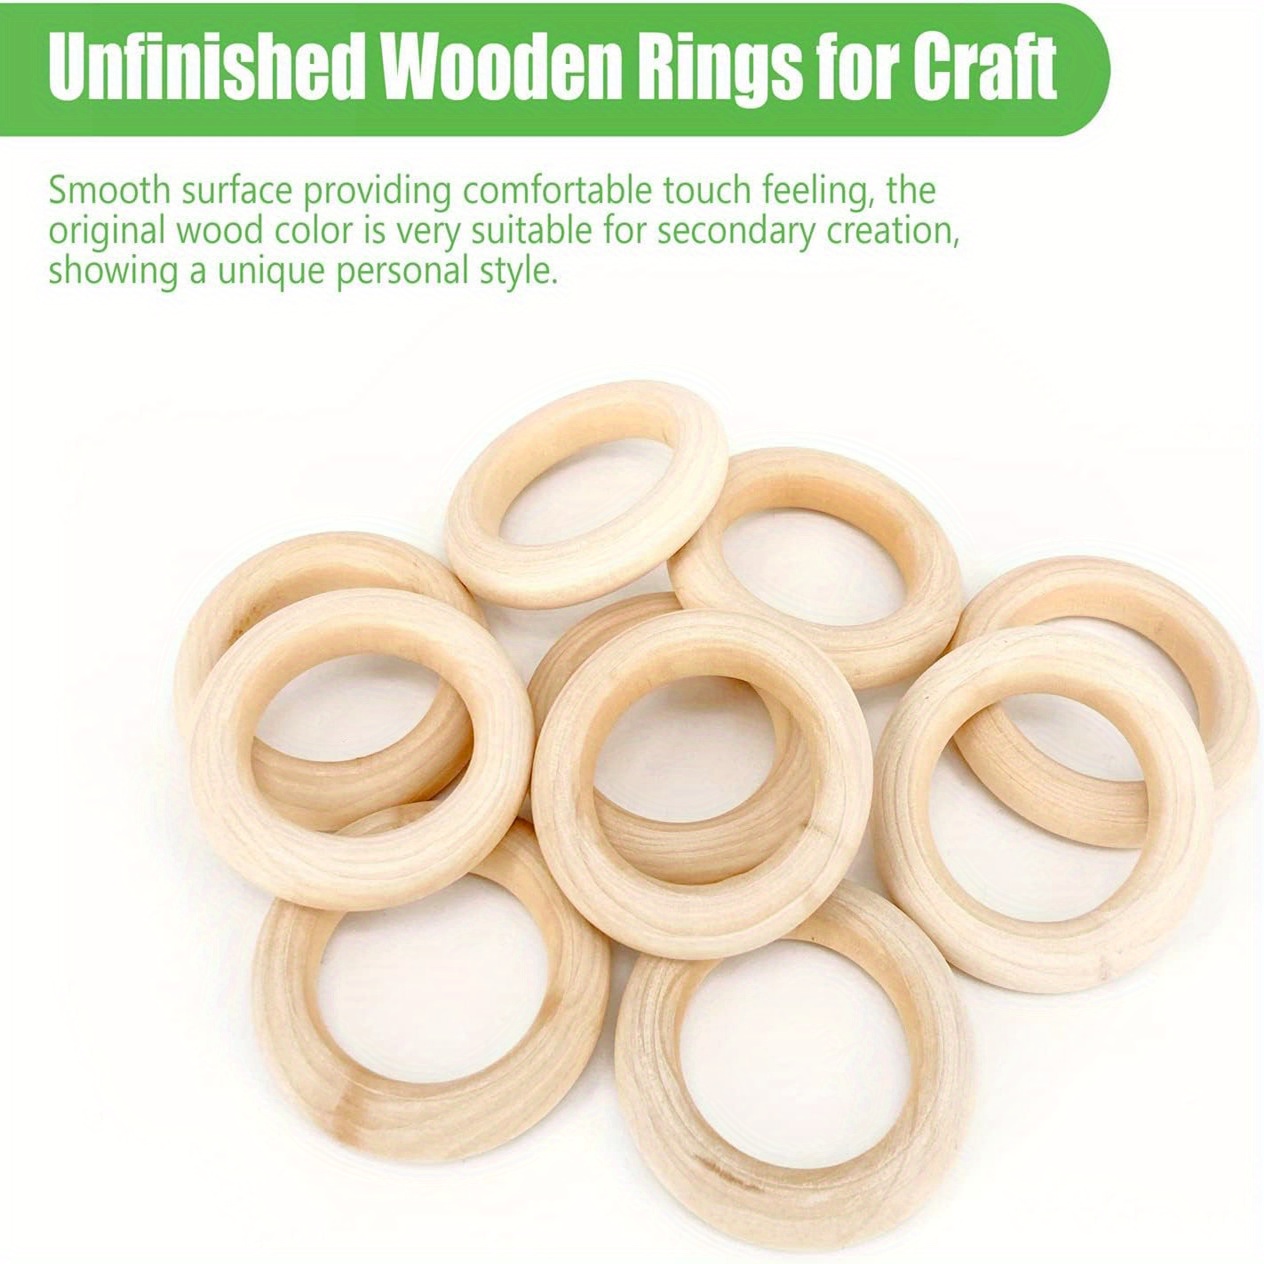 Macrame Rings Large Unfinished Wooden Rings for Dream Catchers